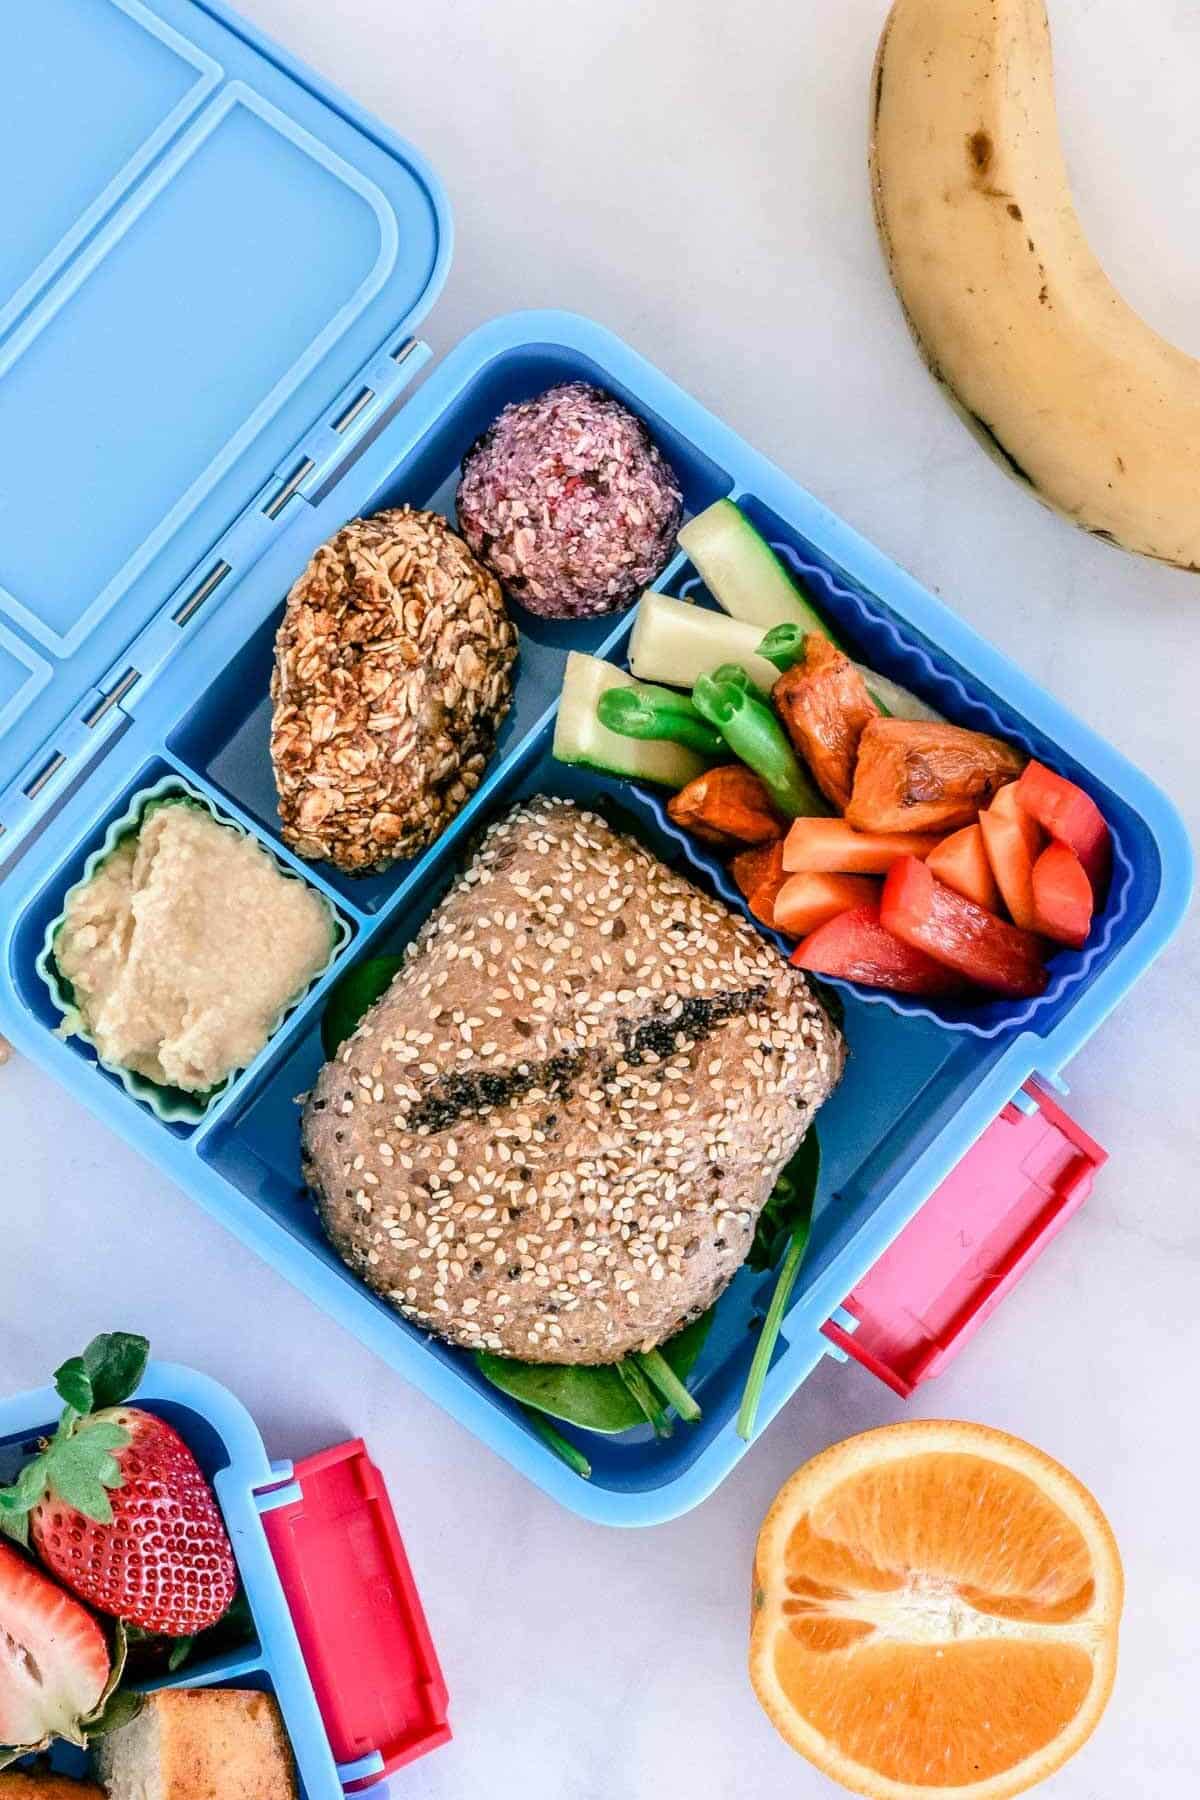 top view of a blue lunchbox with a grain roll and healthy foods